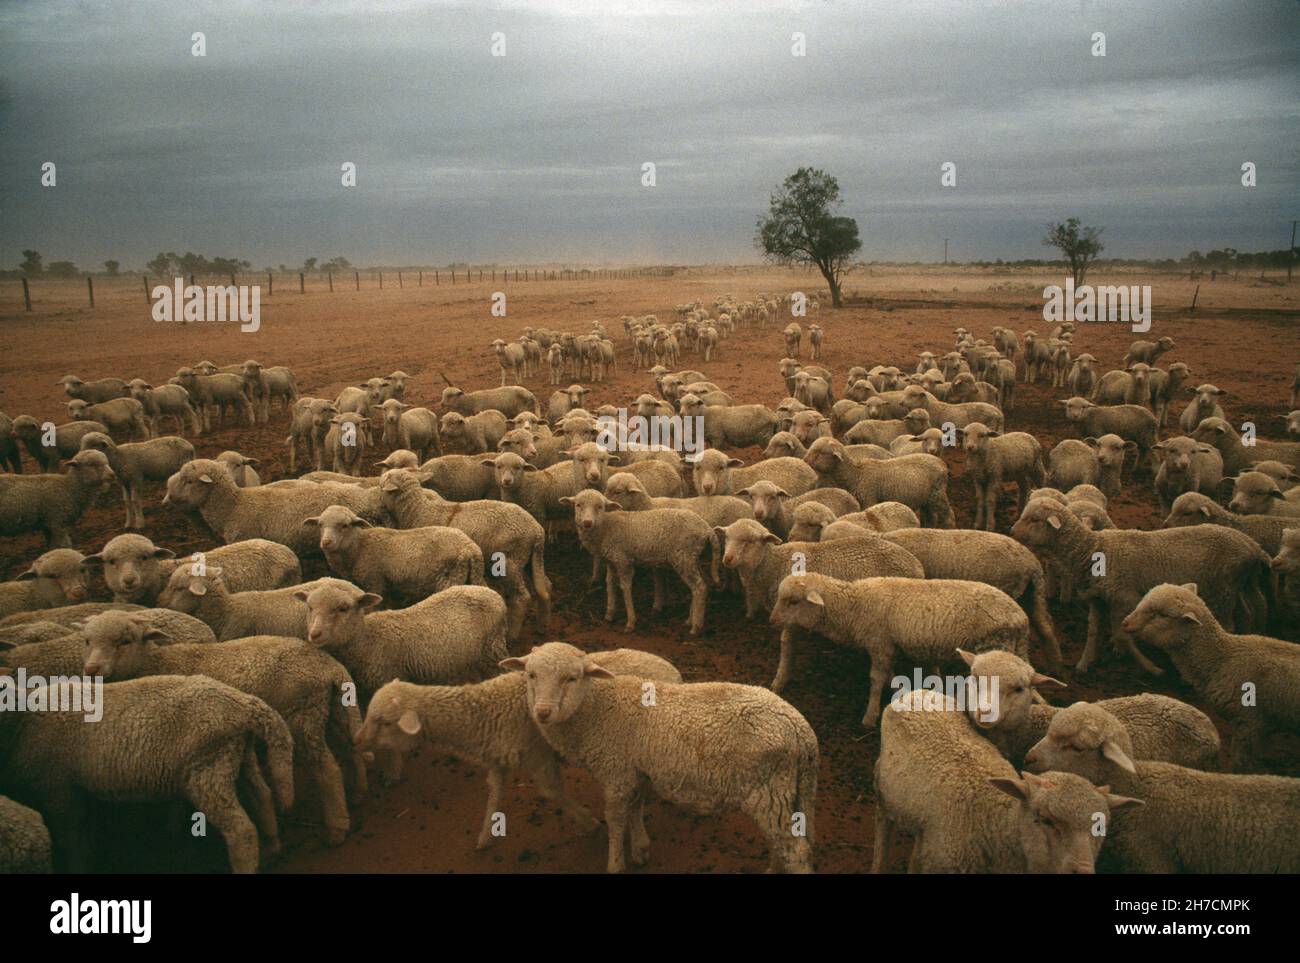 Australia. Queensland. Animal farming. Flock of sheep in dry, stormy landscape. Stock Photo